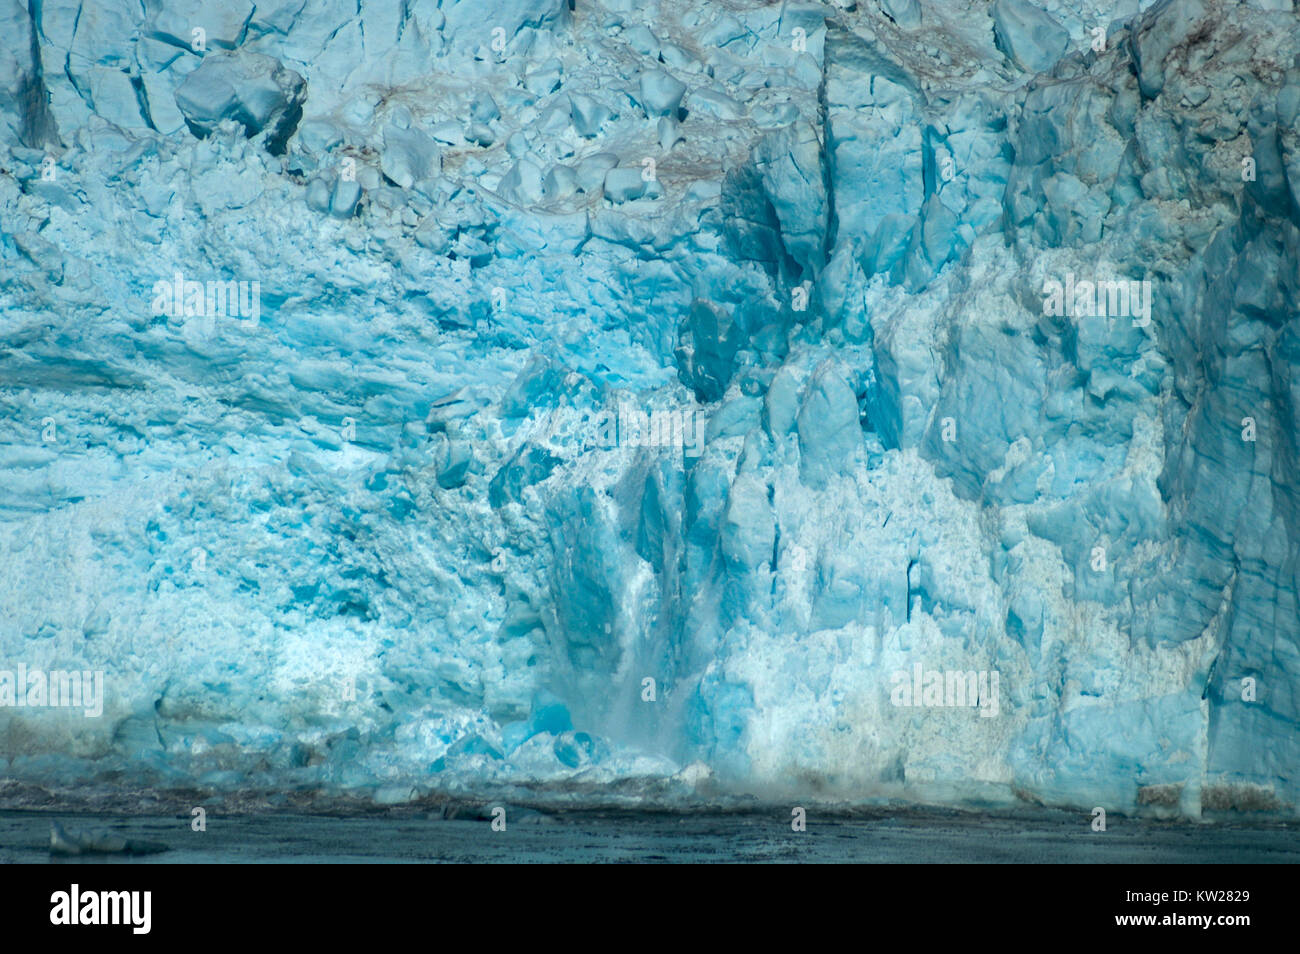 Hubbard Glacier located in eastern Alaska and part of Yukon, Canada, and named after Gardiner Hubbard. Stock Photo